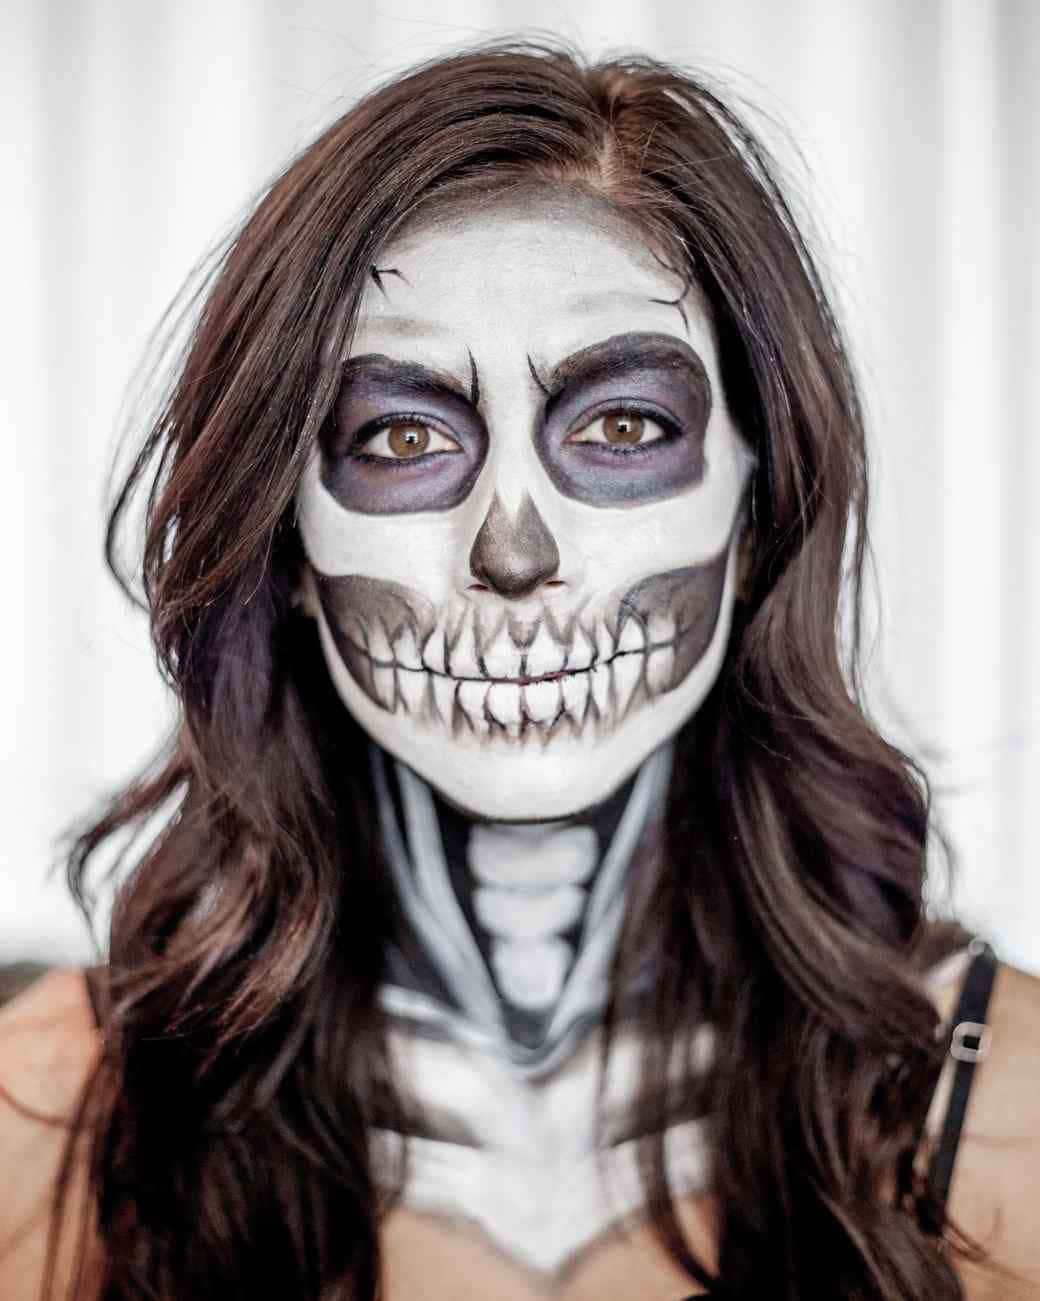 Get creative with your Halloween makes-up this year! Wallpaper